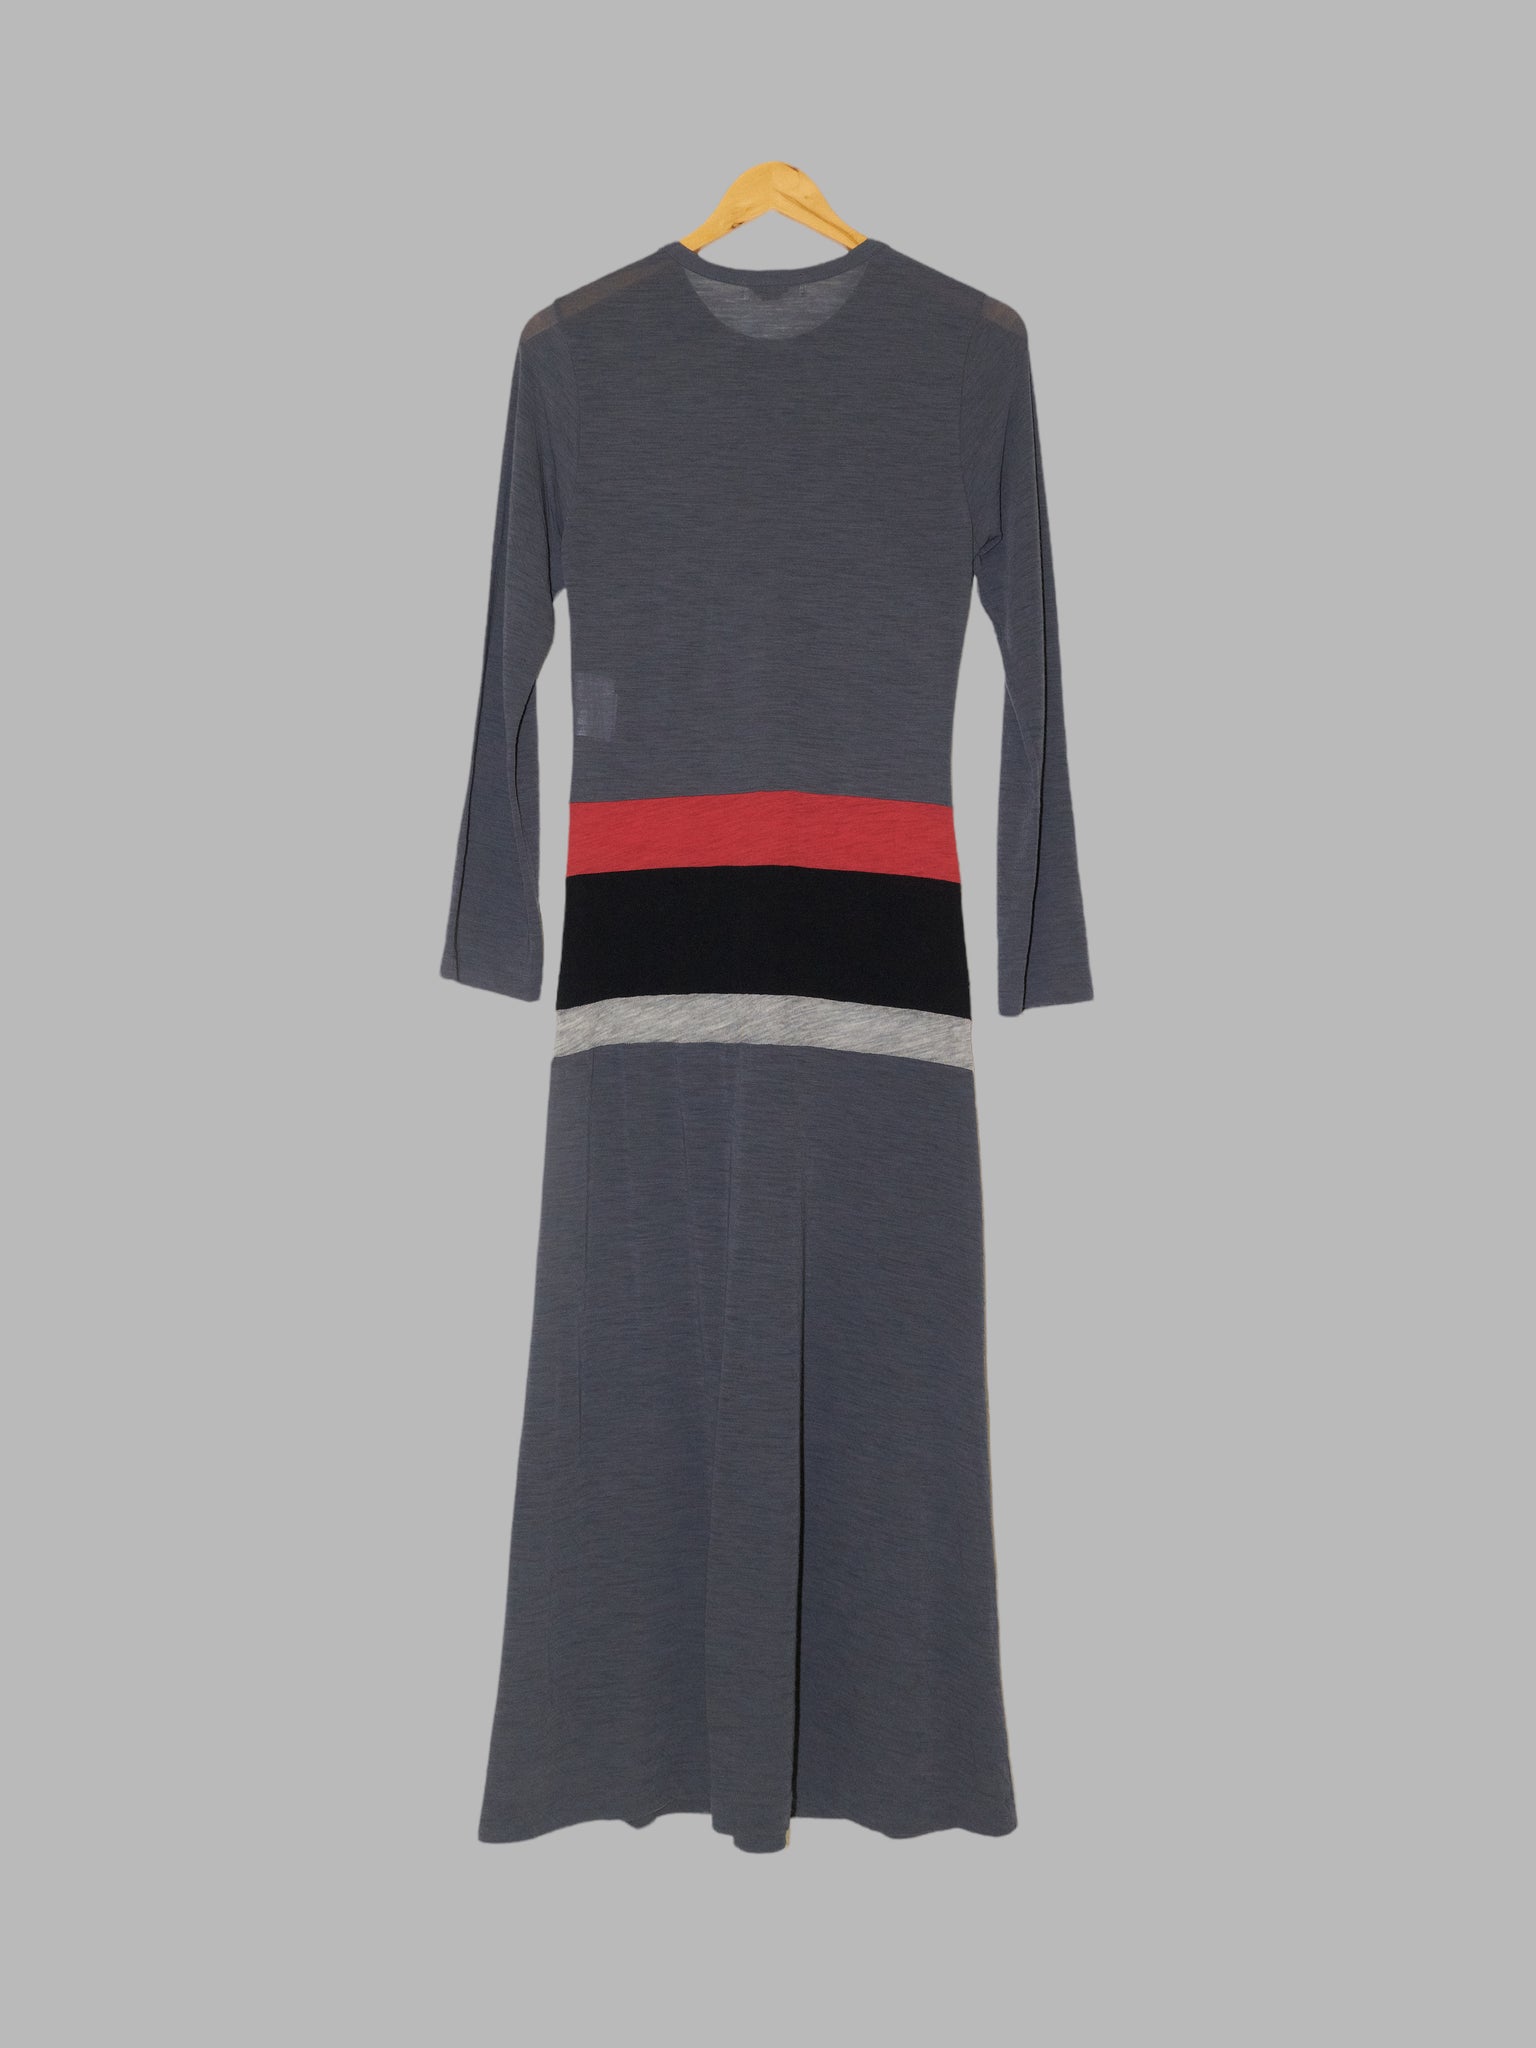 Comme des Garcons SS1996 grey wool jersey maxi dress with contrast panels